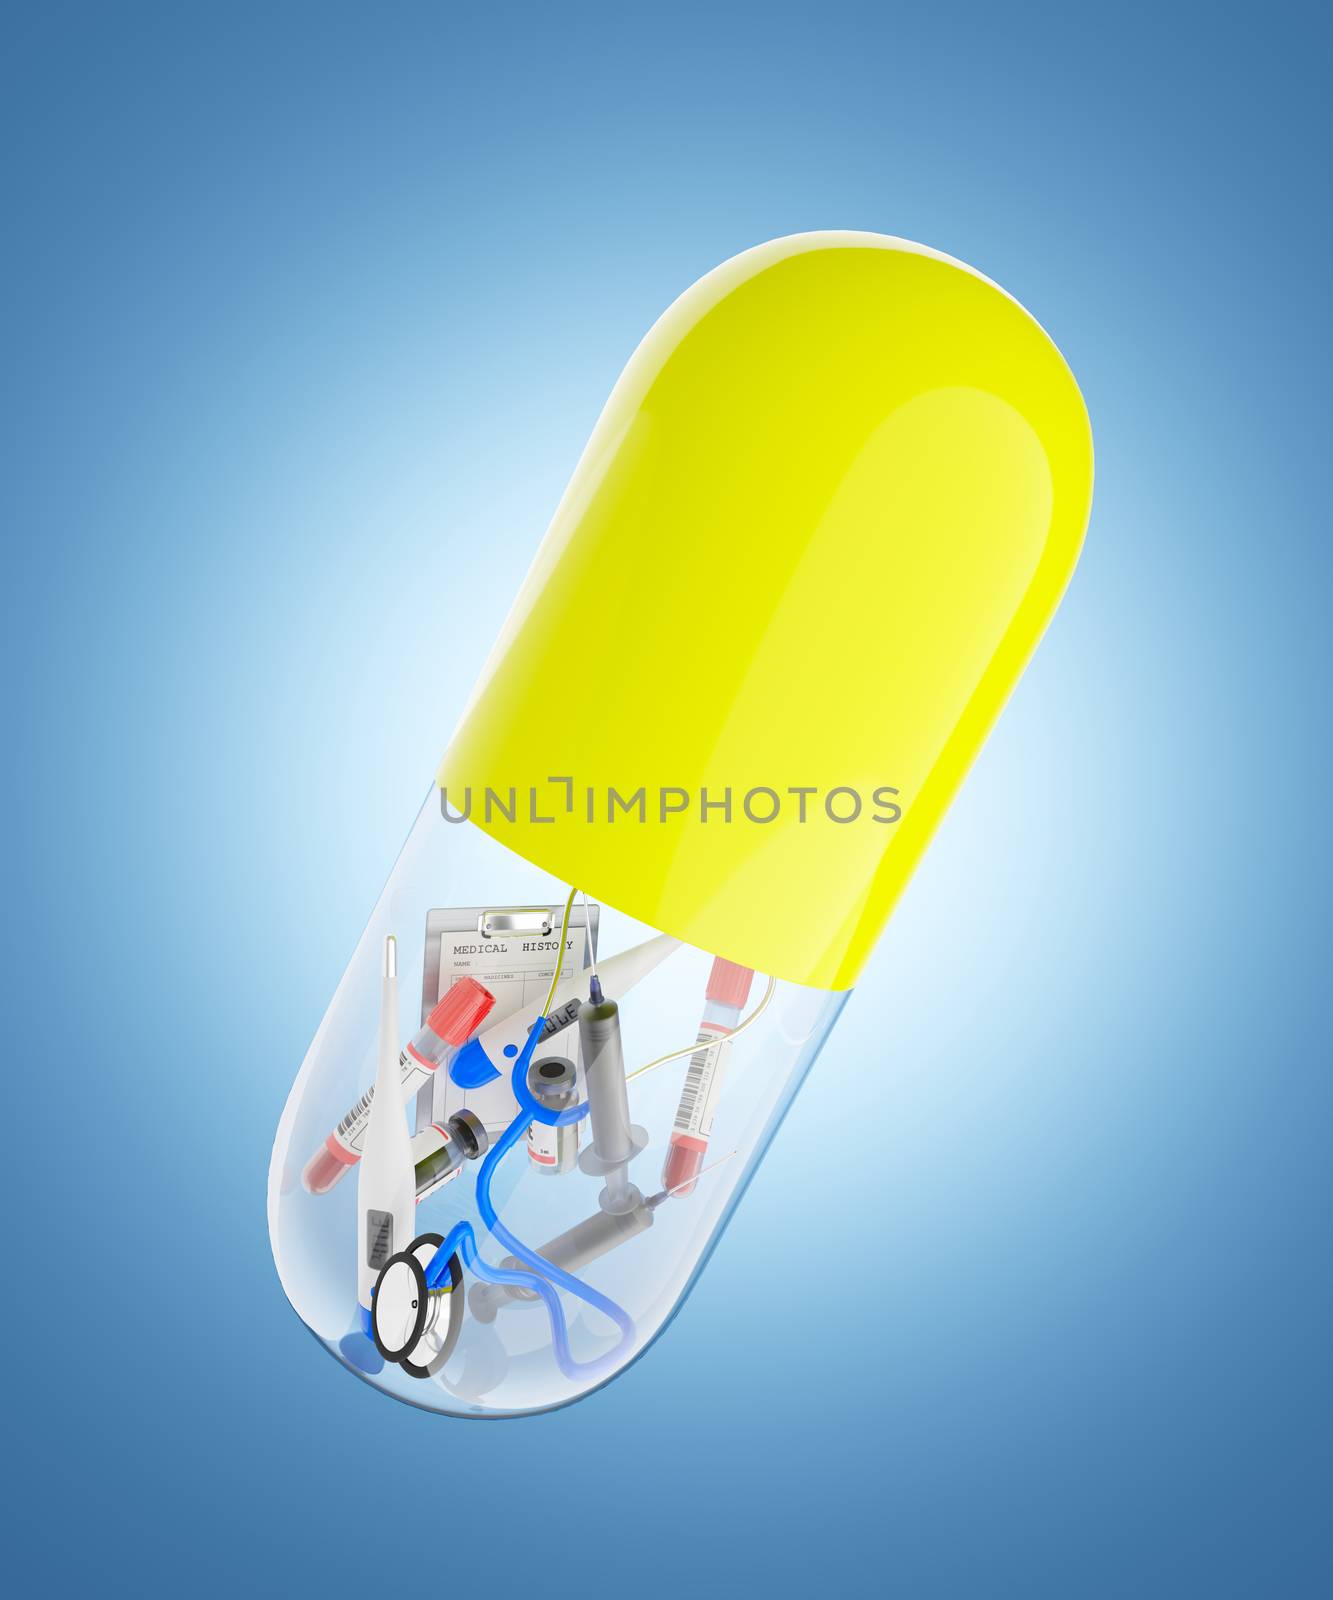 The medical device is packaged in a yellow and clear antibiotic. by SaitanSainam